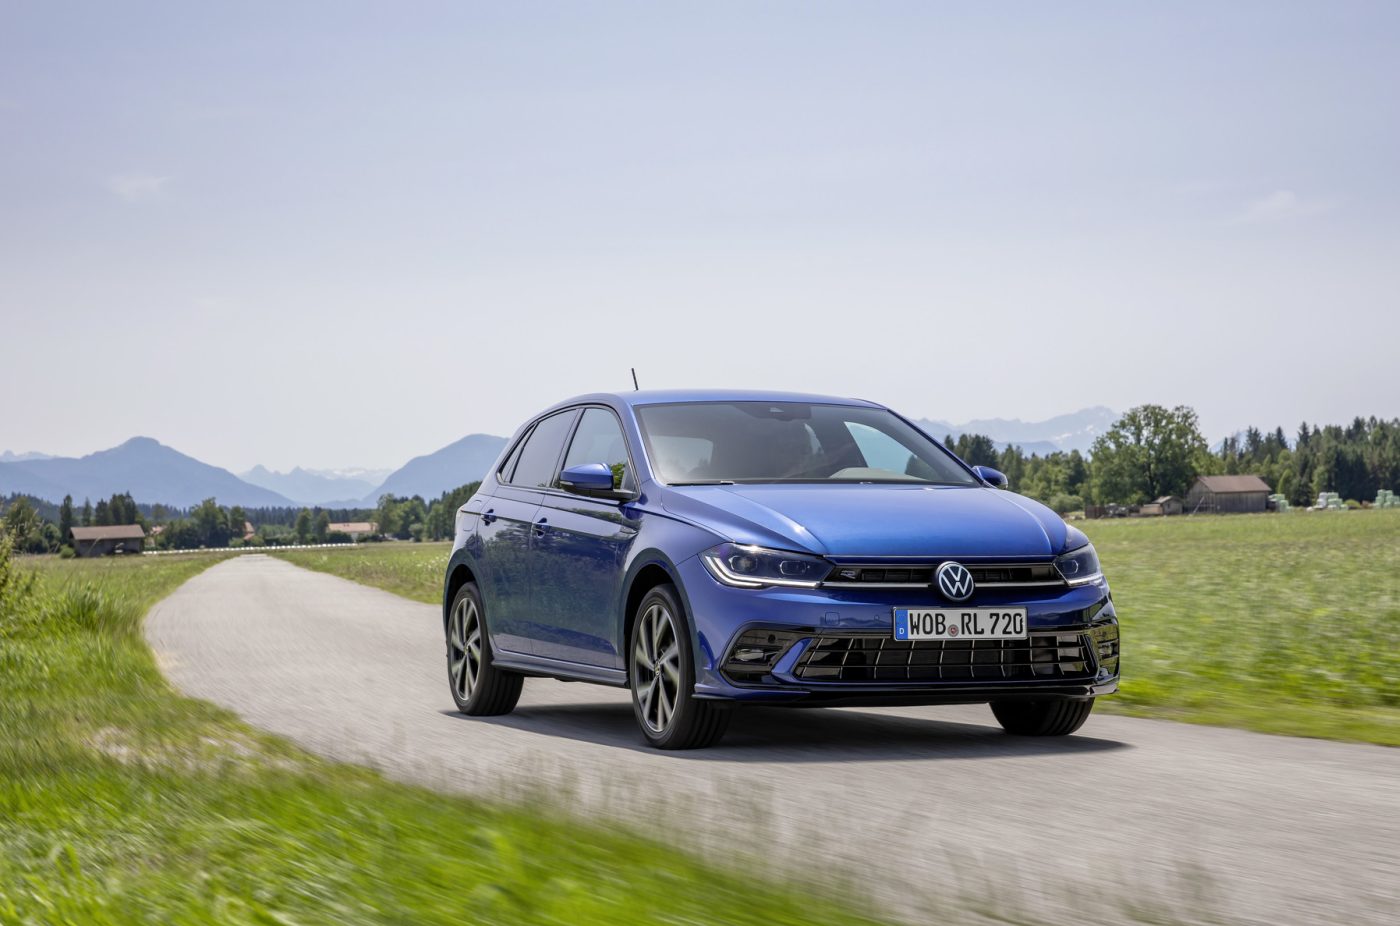 New images of the Volkswagen Polo 2022, what do you think?